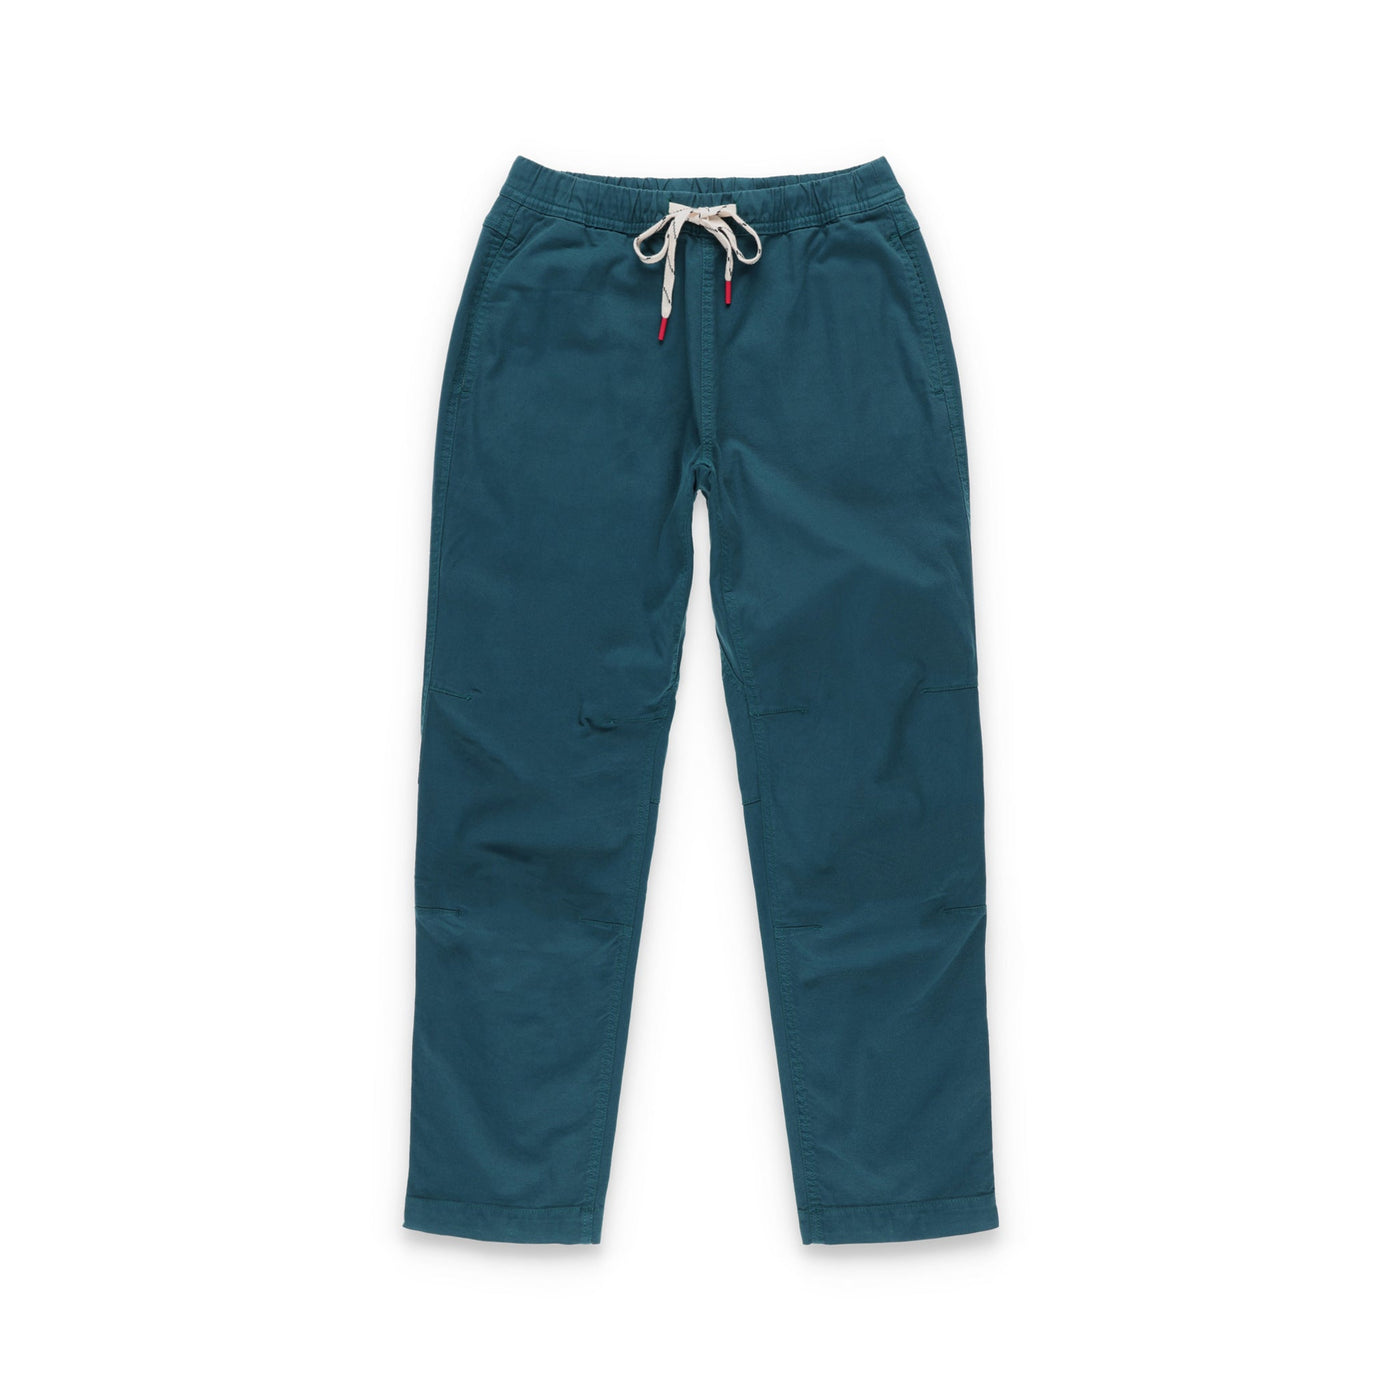 Topo Designs Women's Dirt Pants in 100% organic cotton with drawstring waist in "Pond Blue"